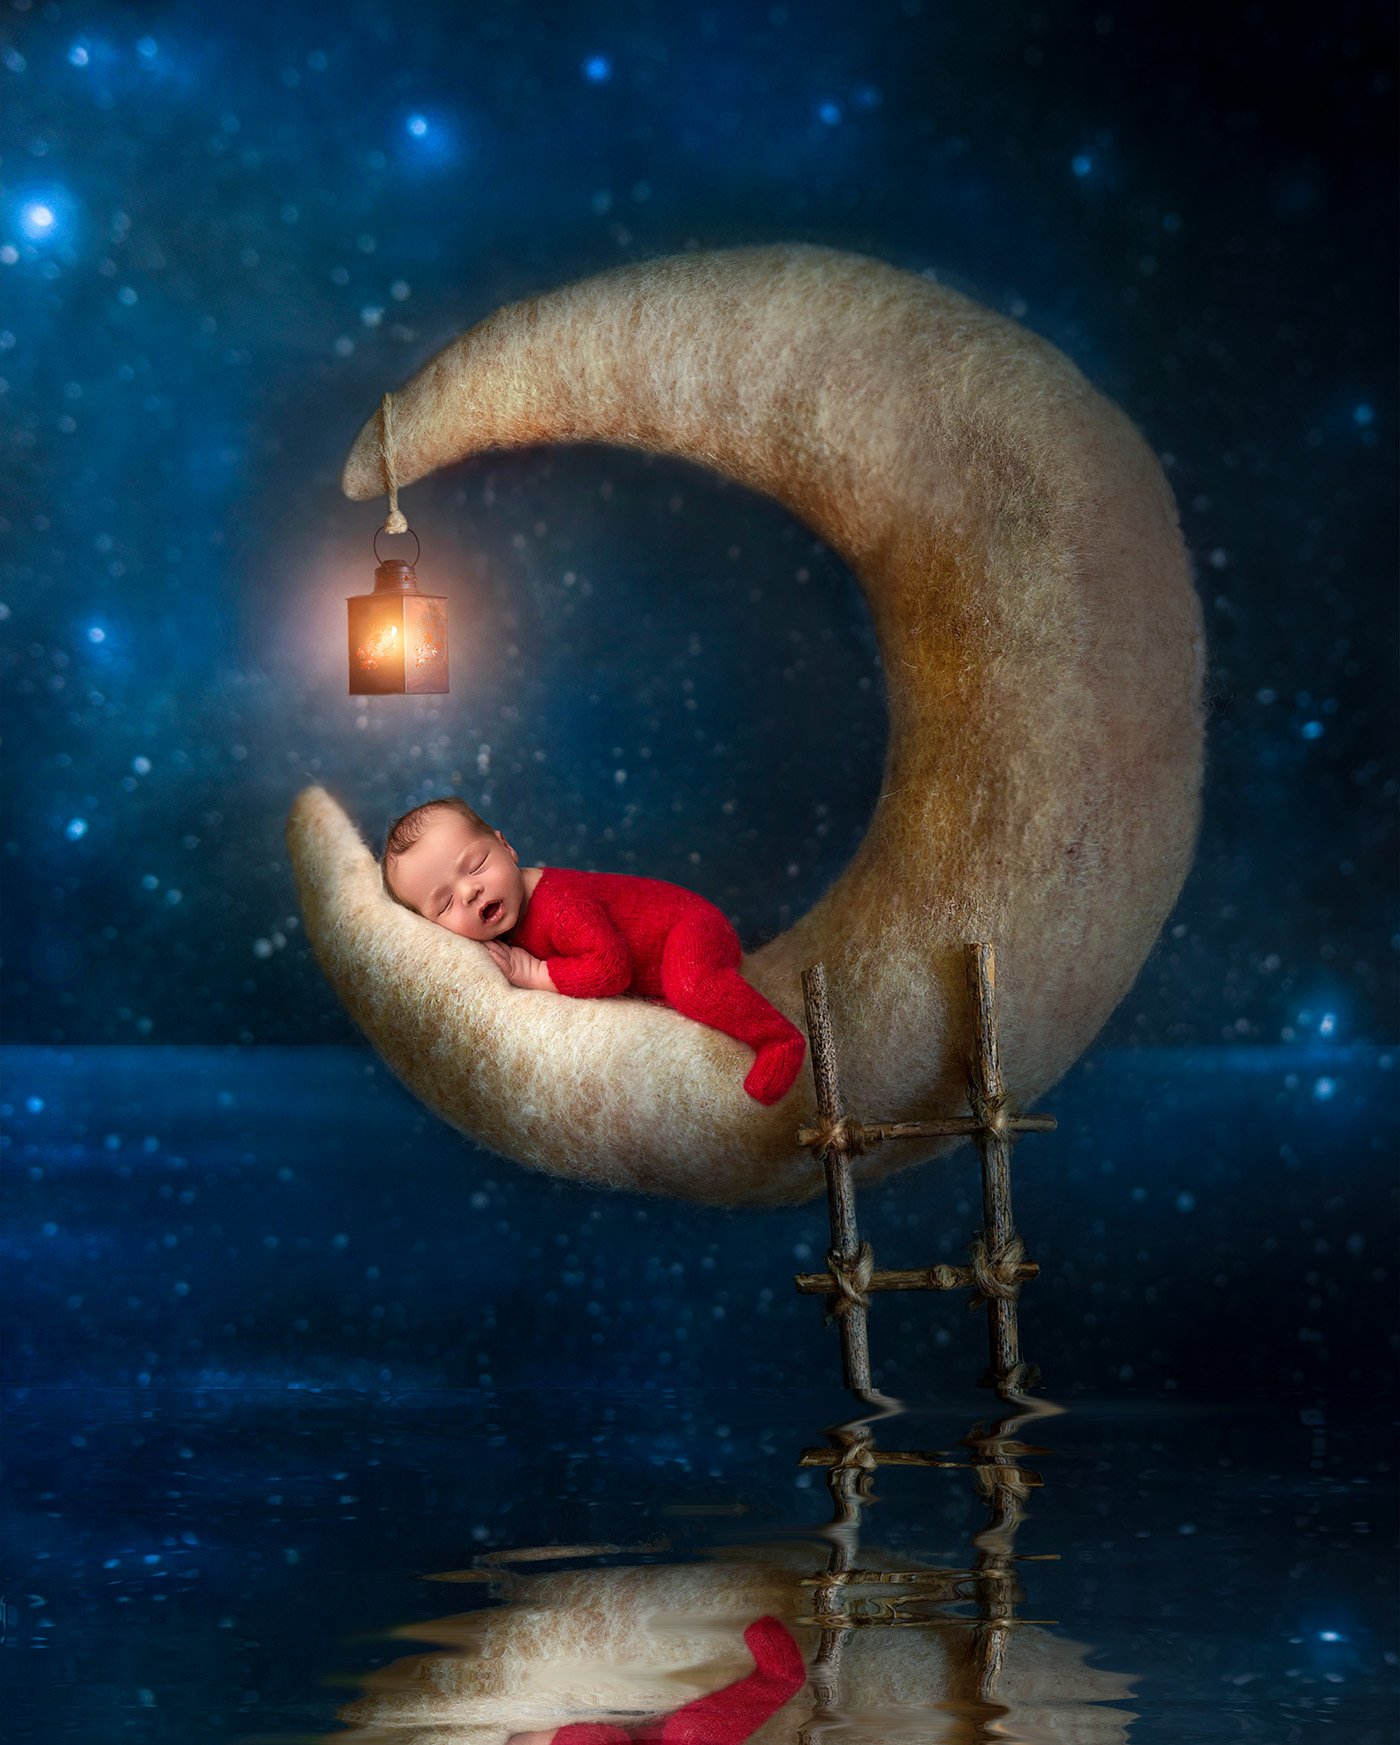 sleeping on the crescent moon with a hanging lantern above his head 